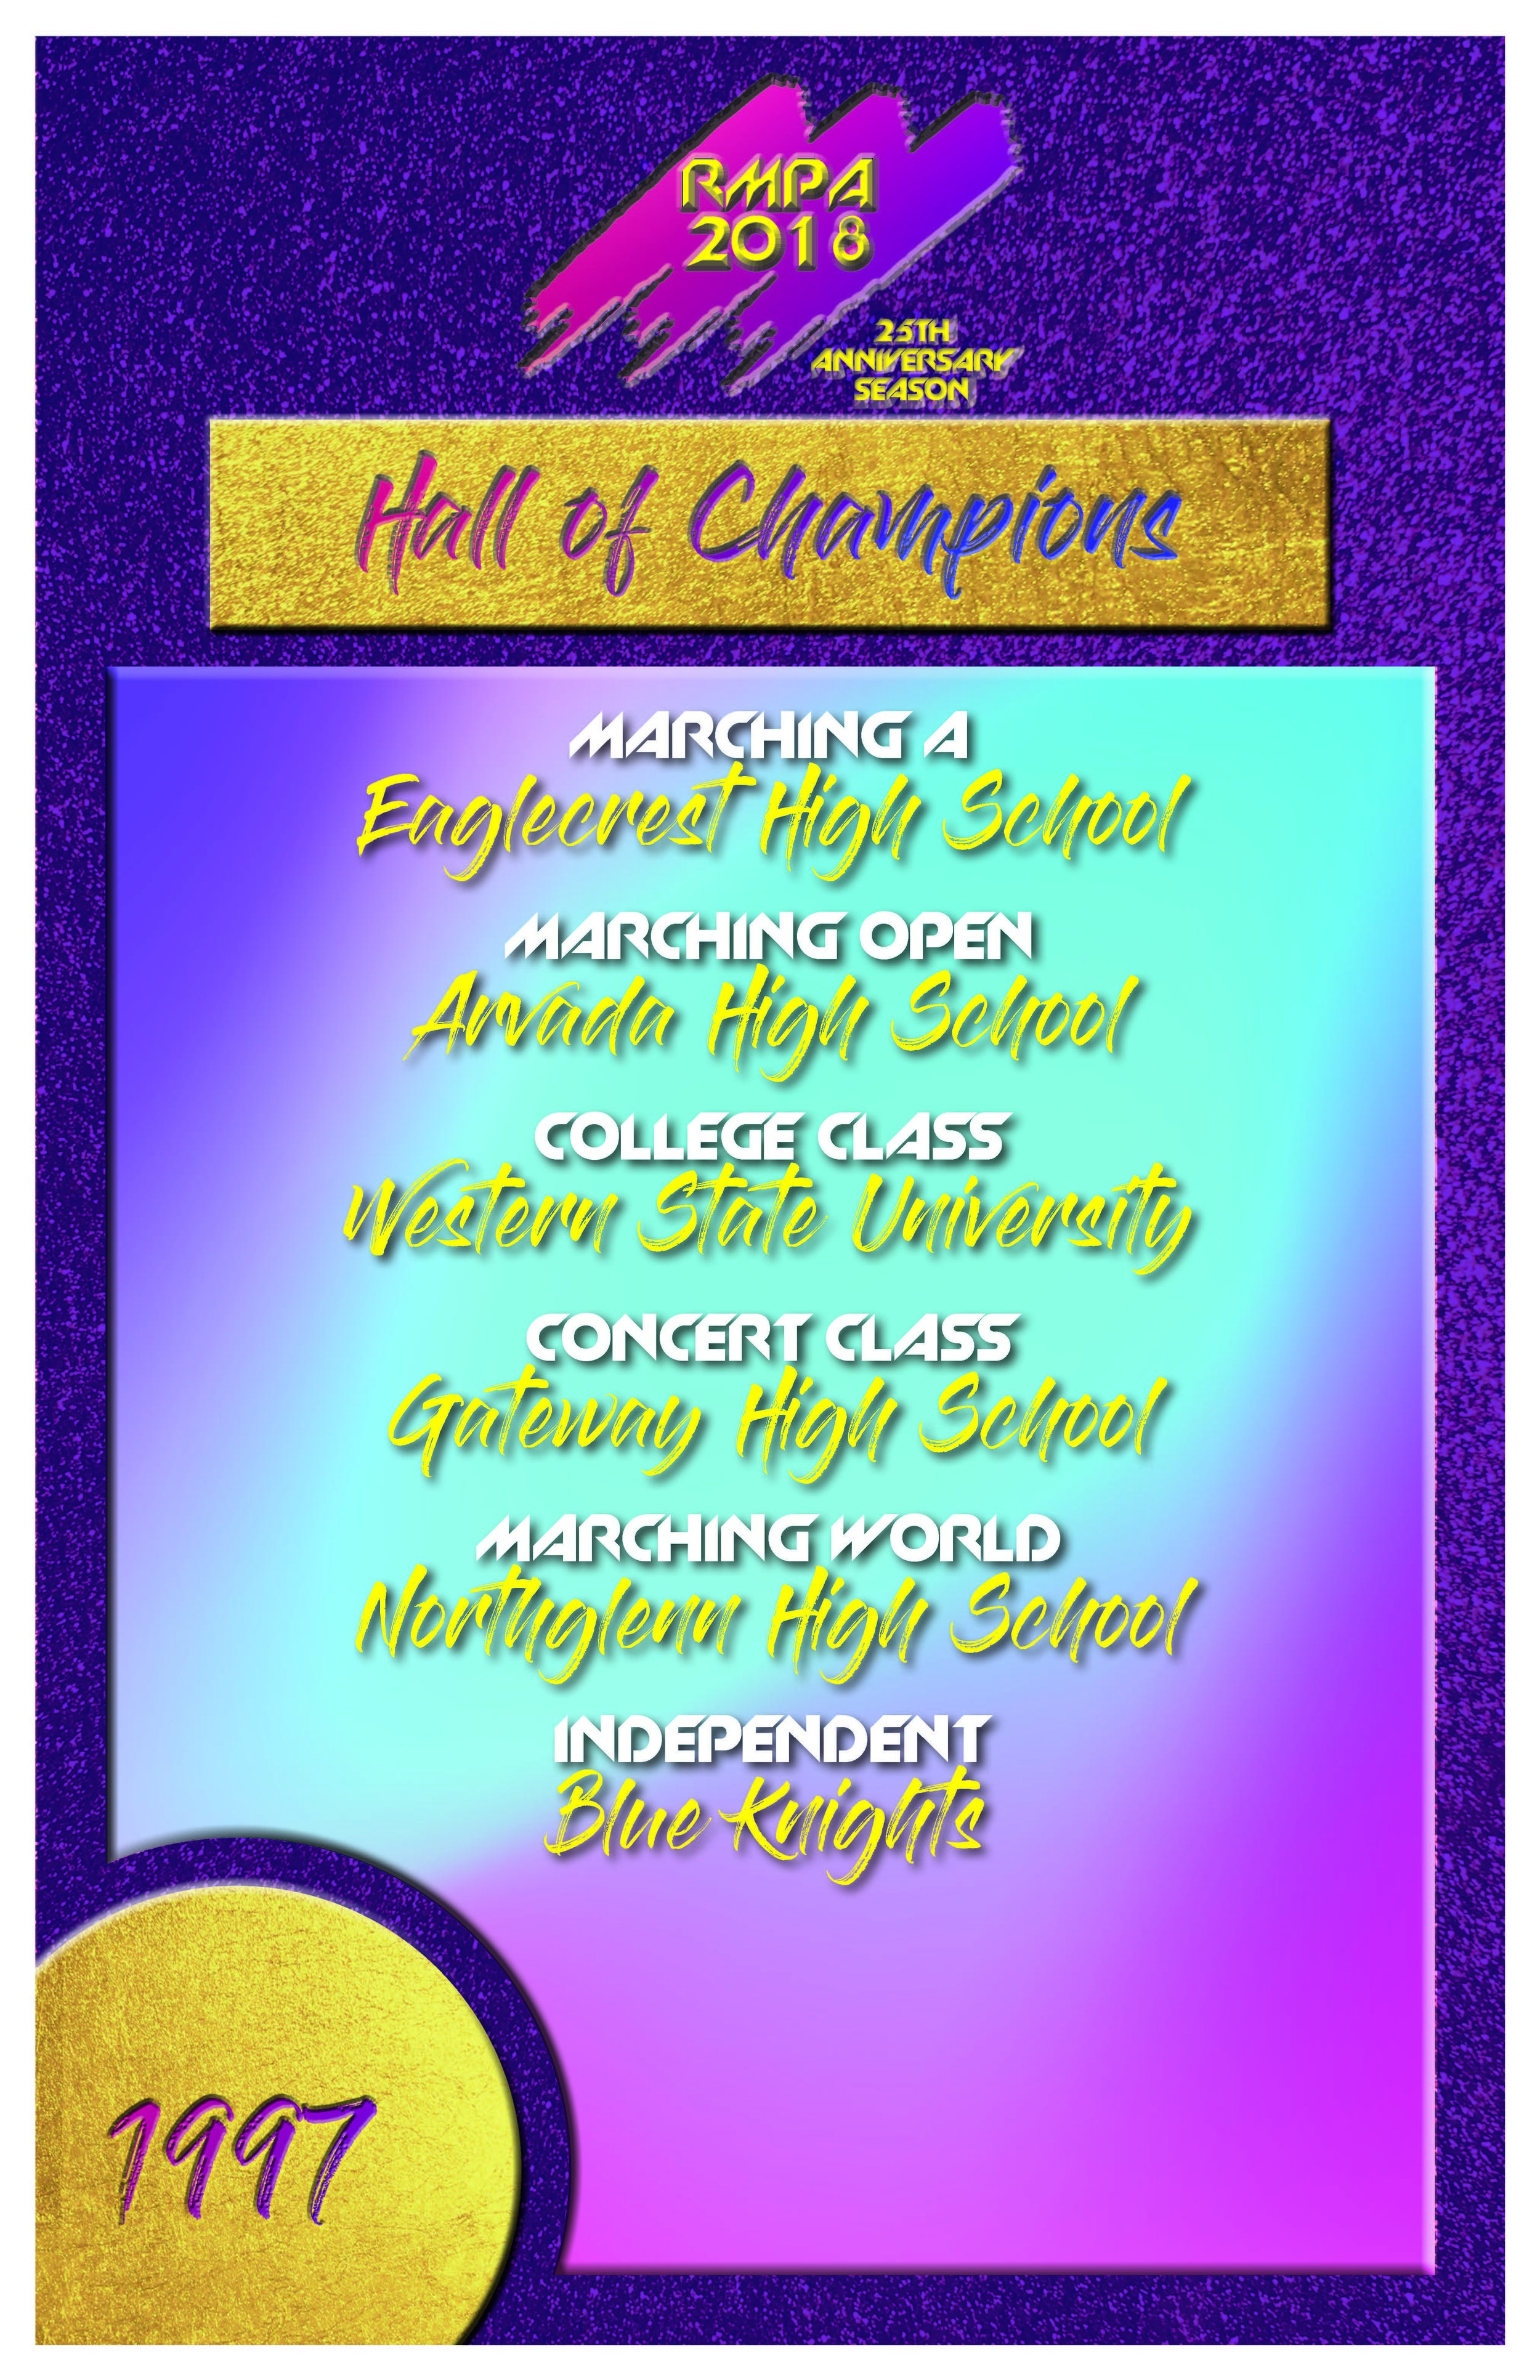 Hall of Champions Posters_Page_05.jpg